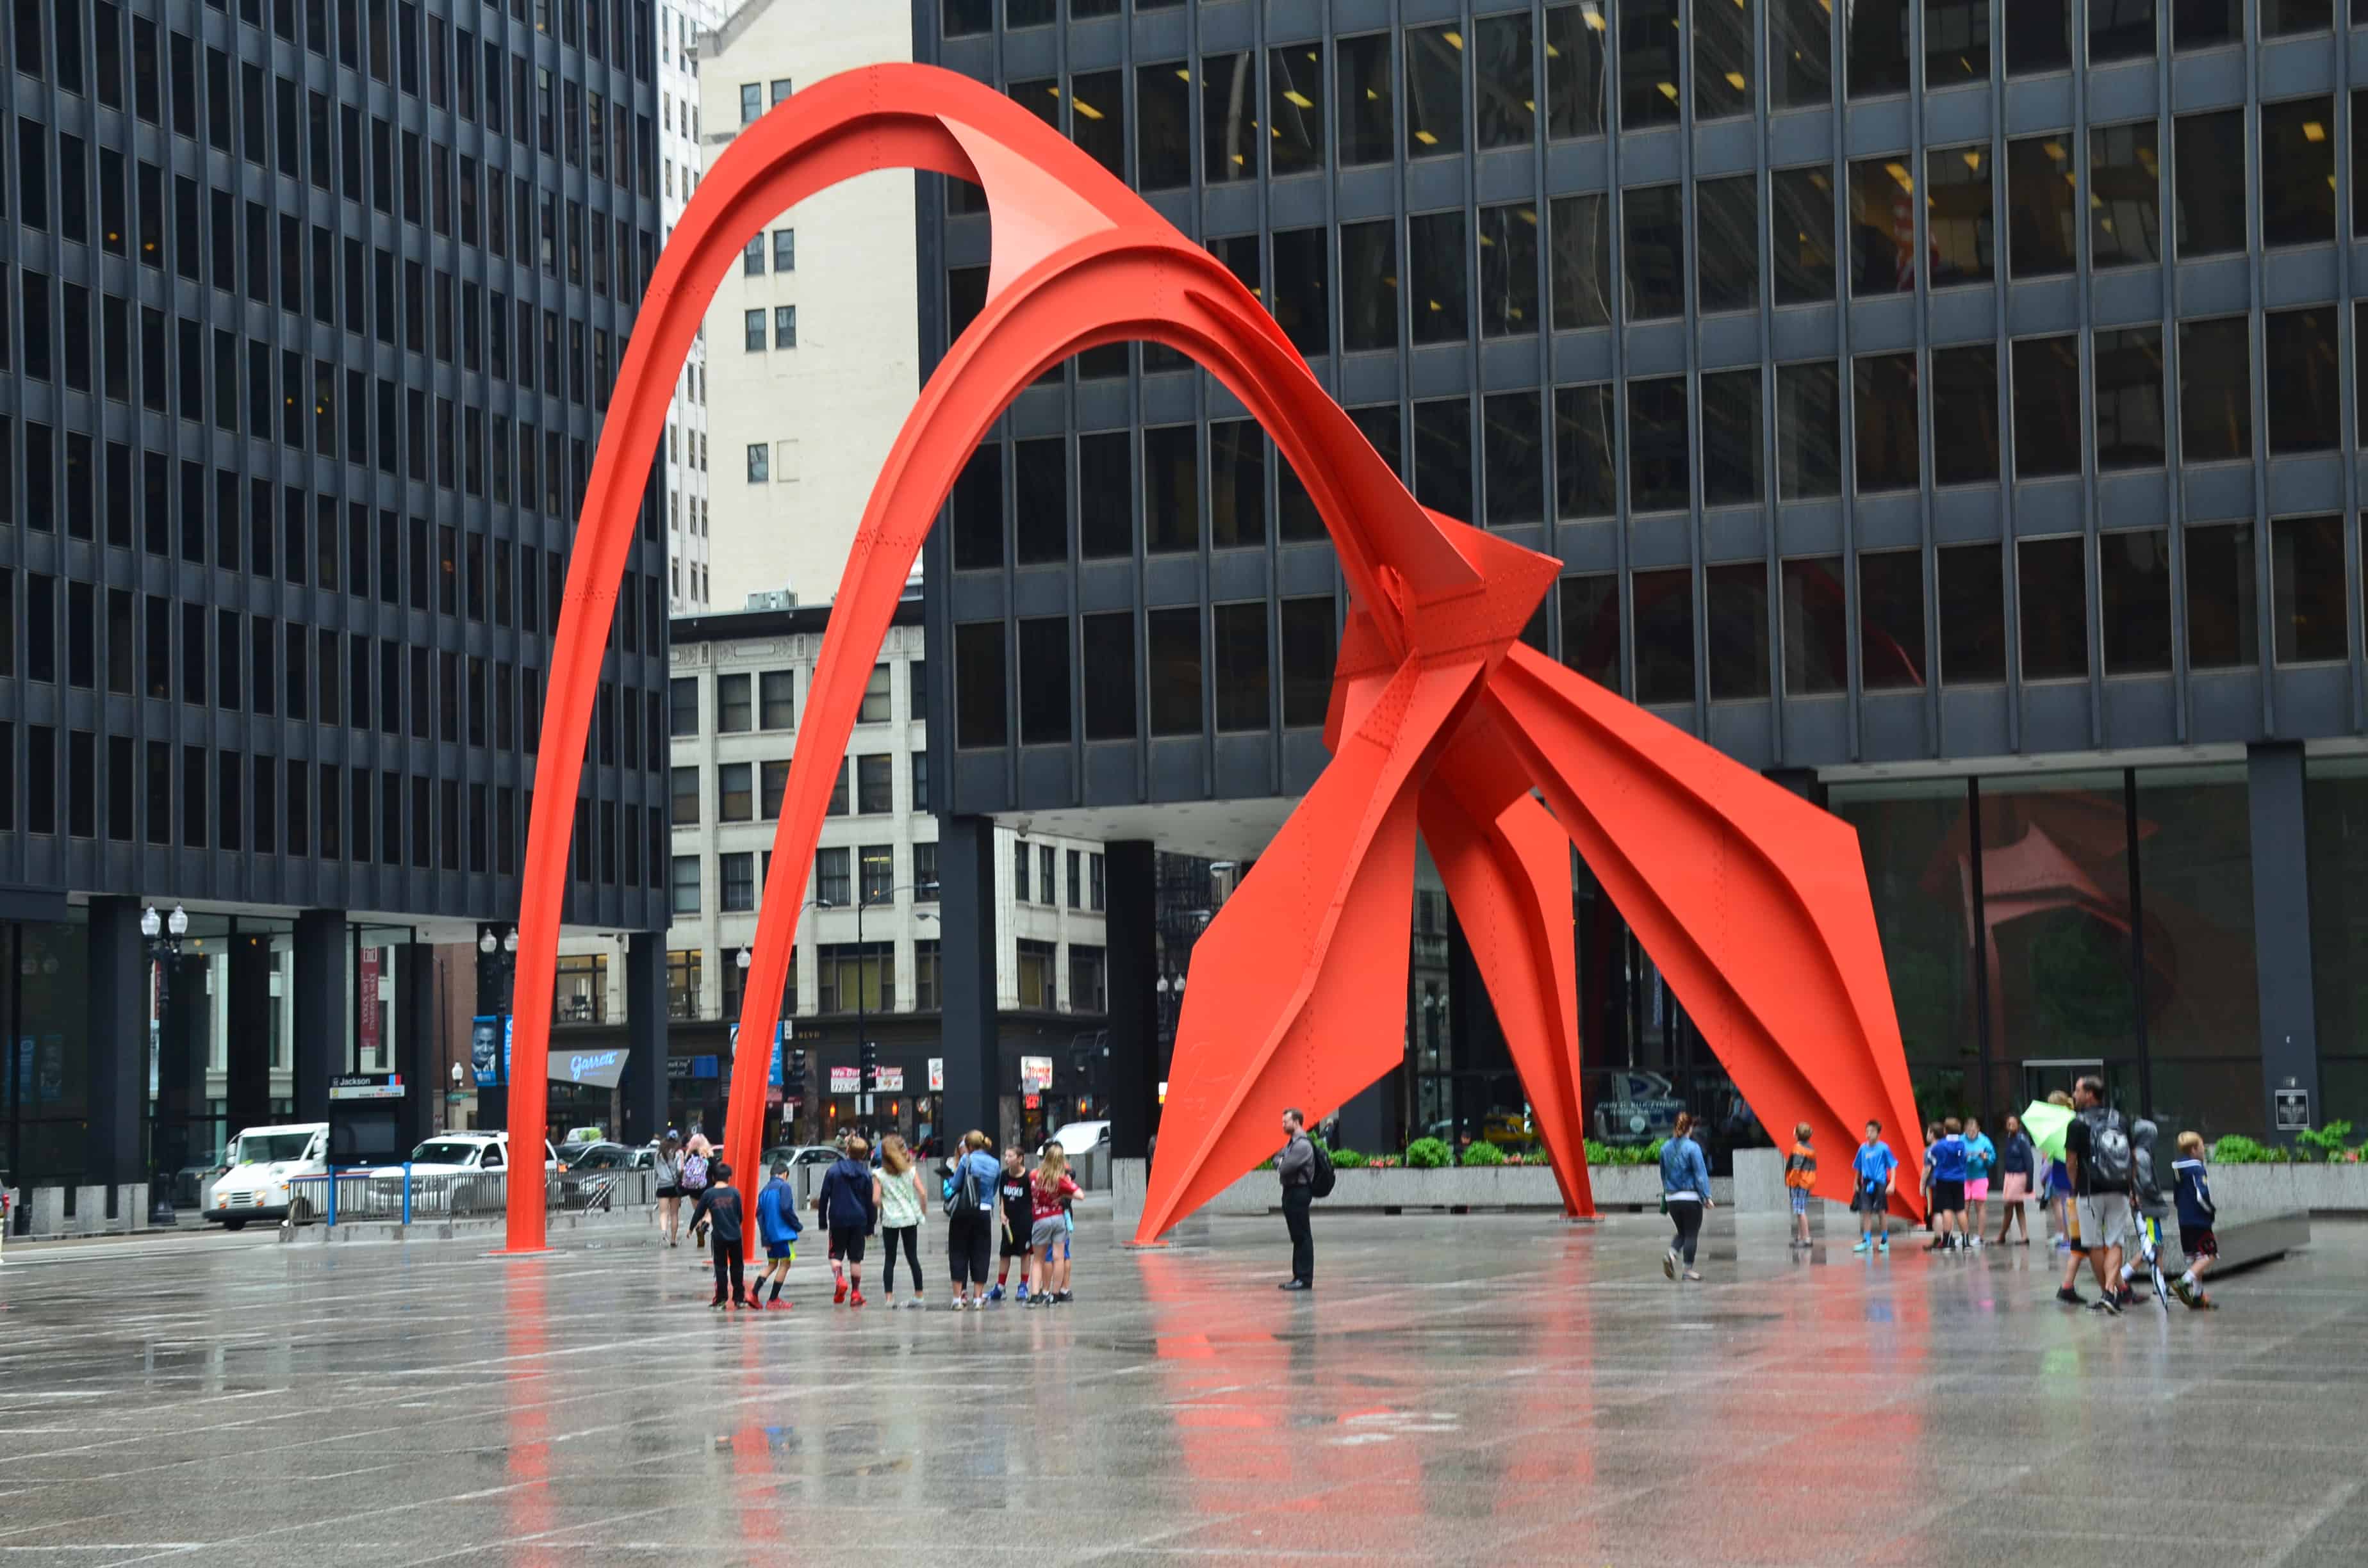 Flamingo by Alexander Calder at Federal Plaza in Chicago, Illinois